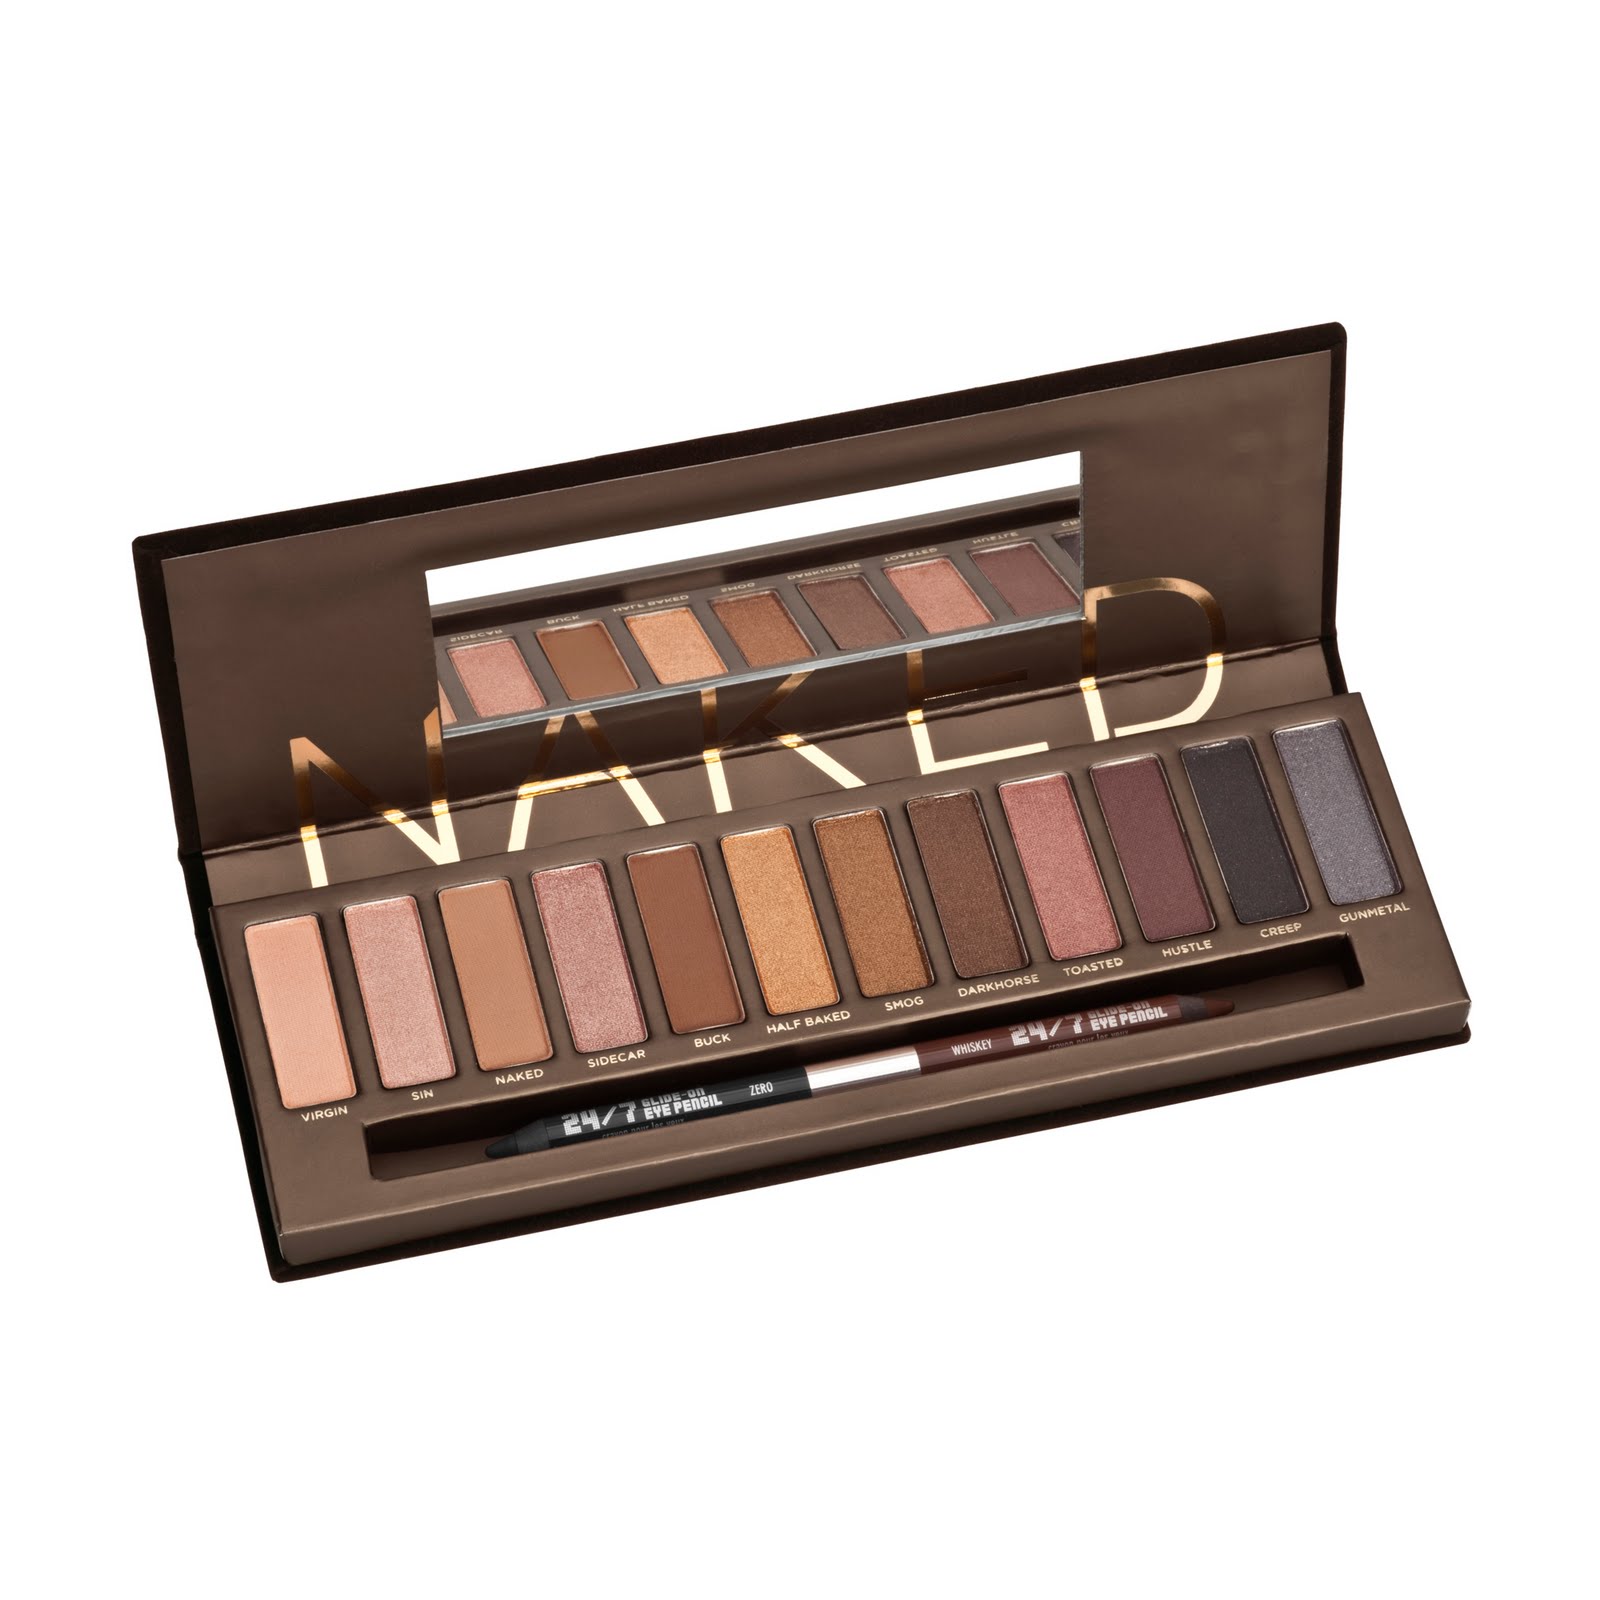 Urban Decay Naked Palette for cheap?!